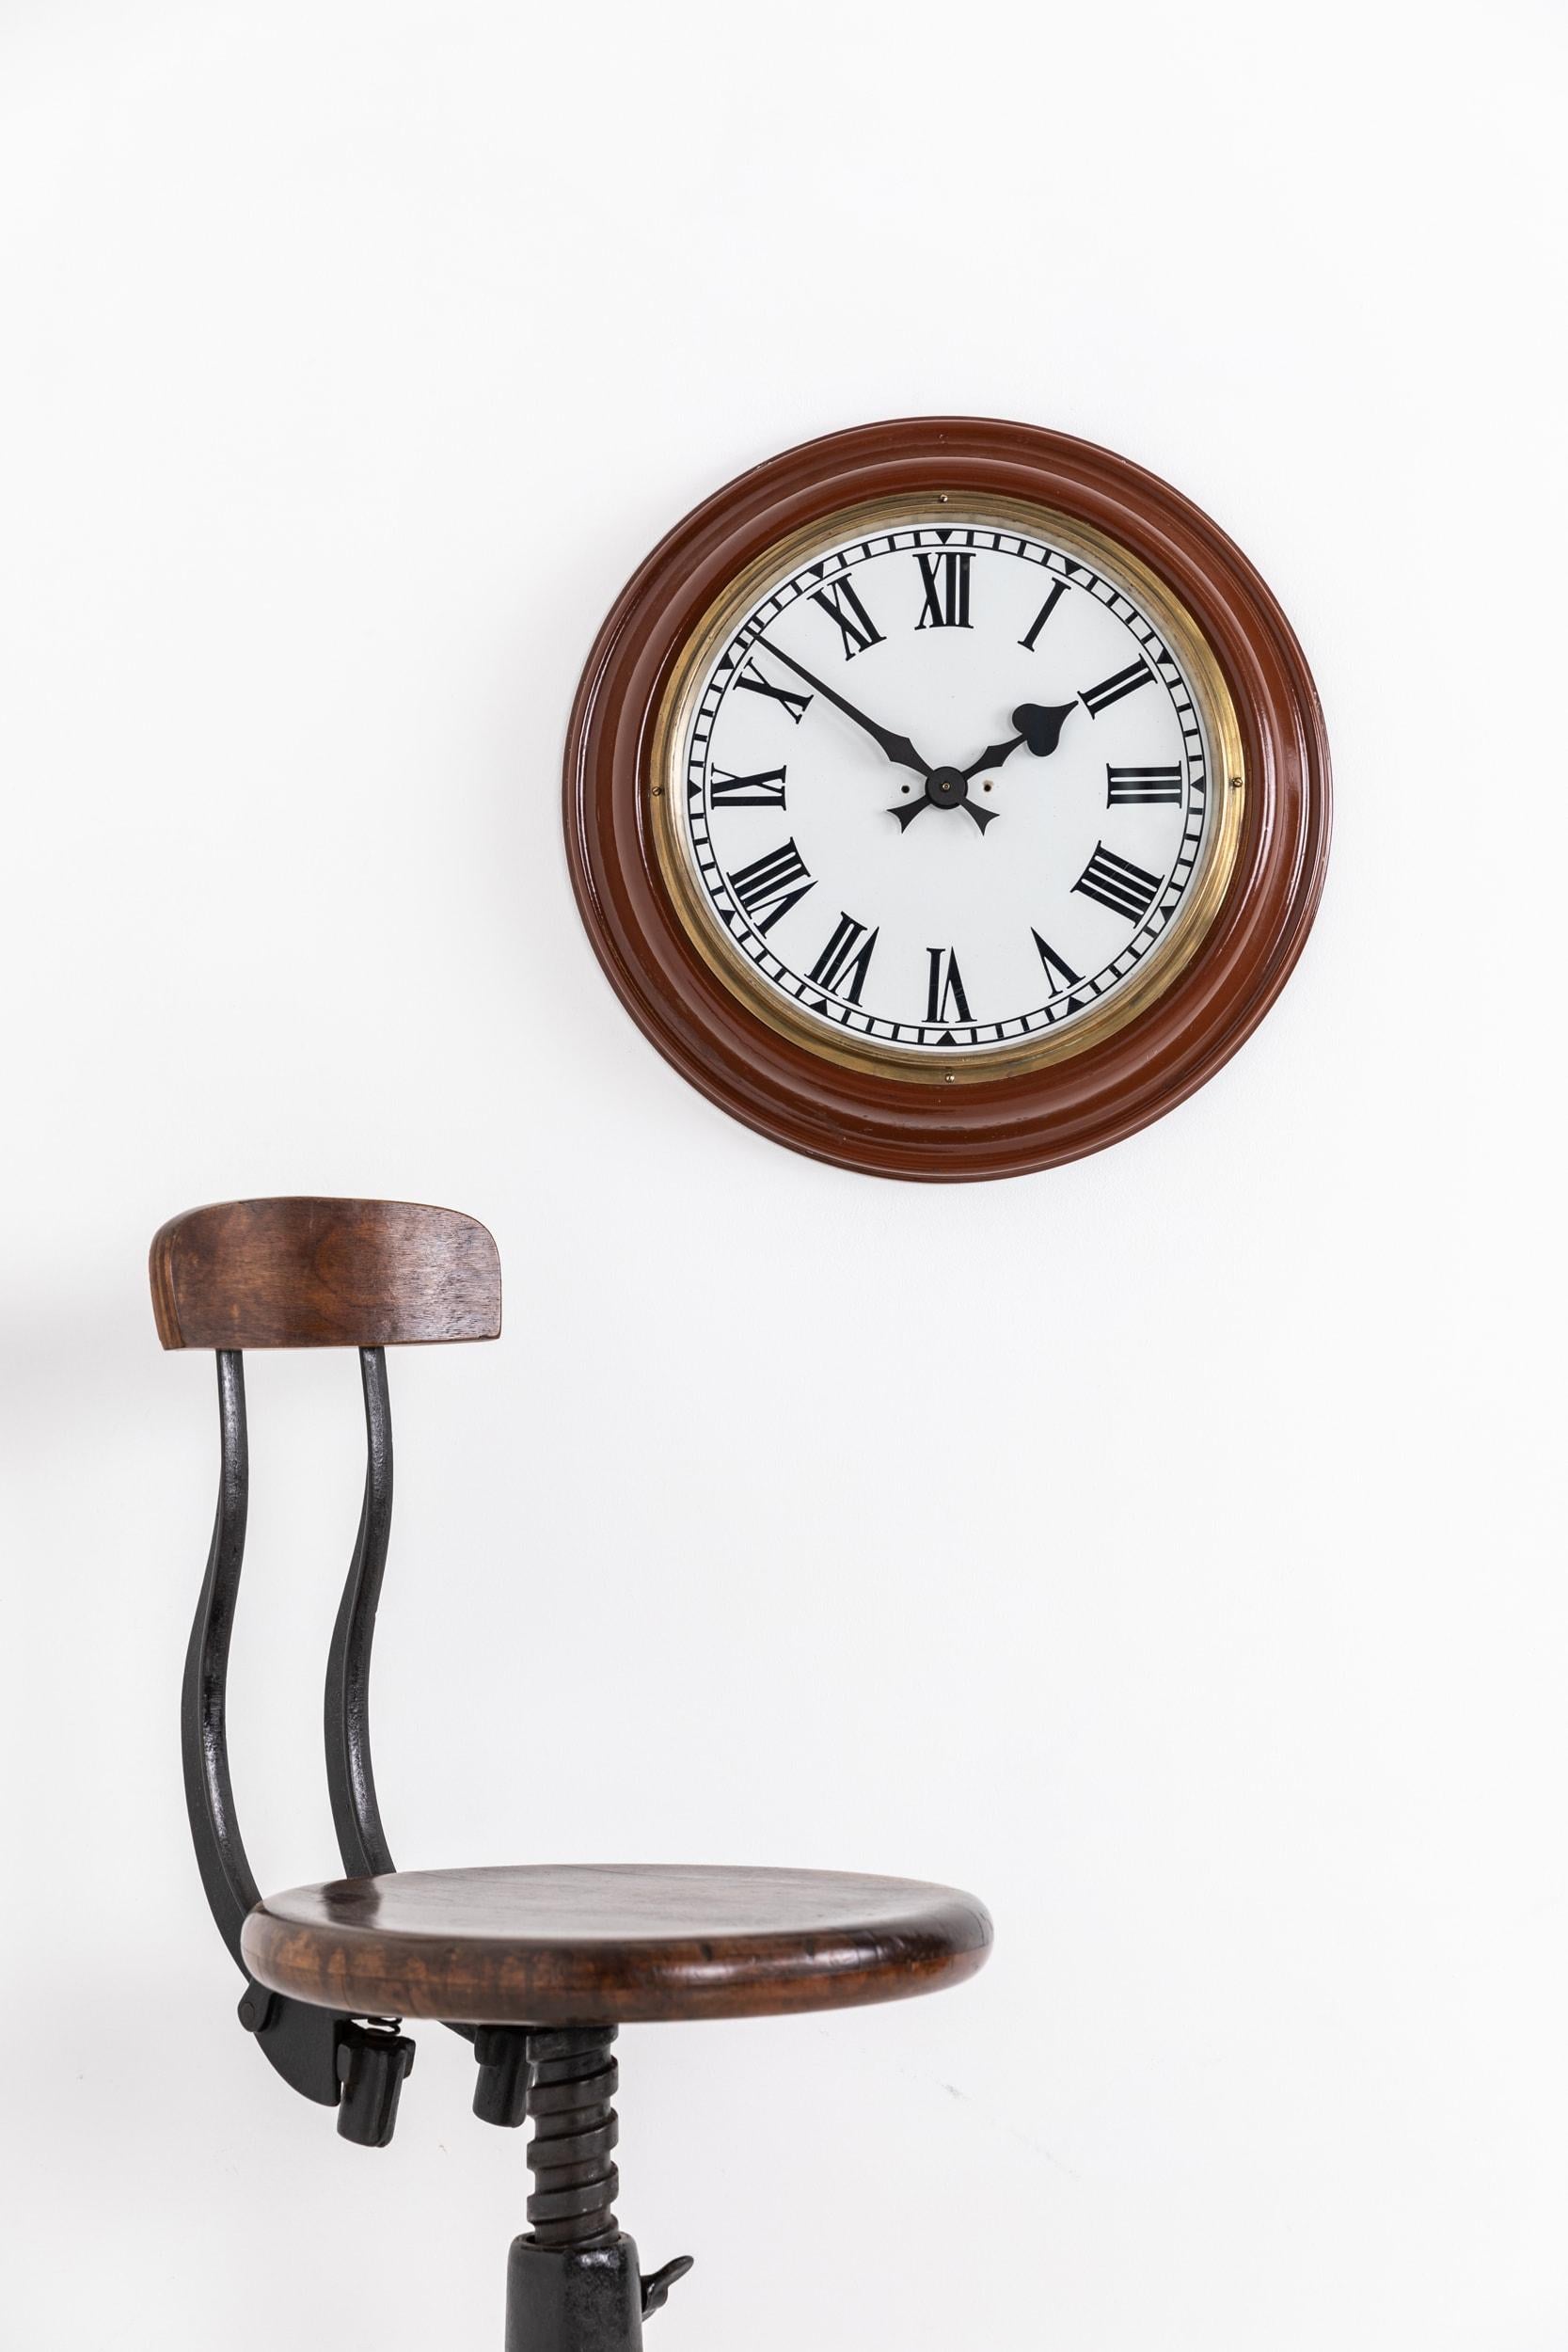 Vintage Industrial Brown Enamel Synchronome Factory Wall Clock, c.1930 For Sale 1